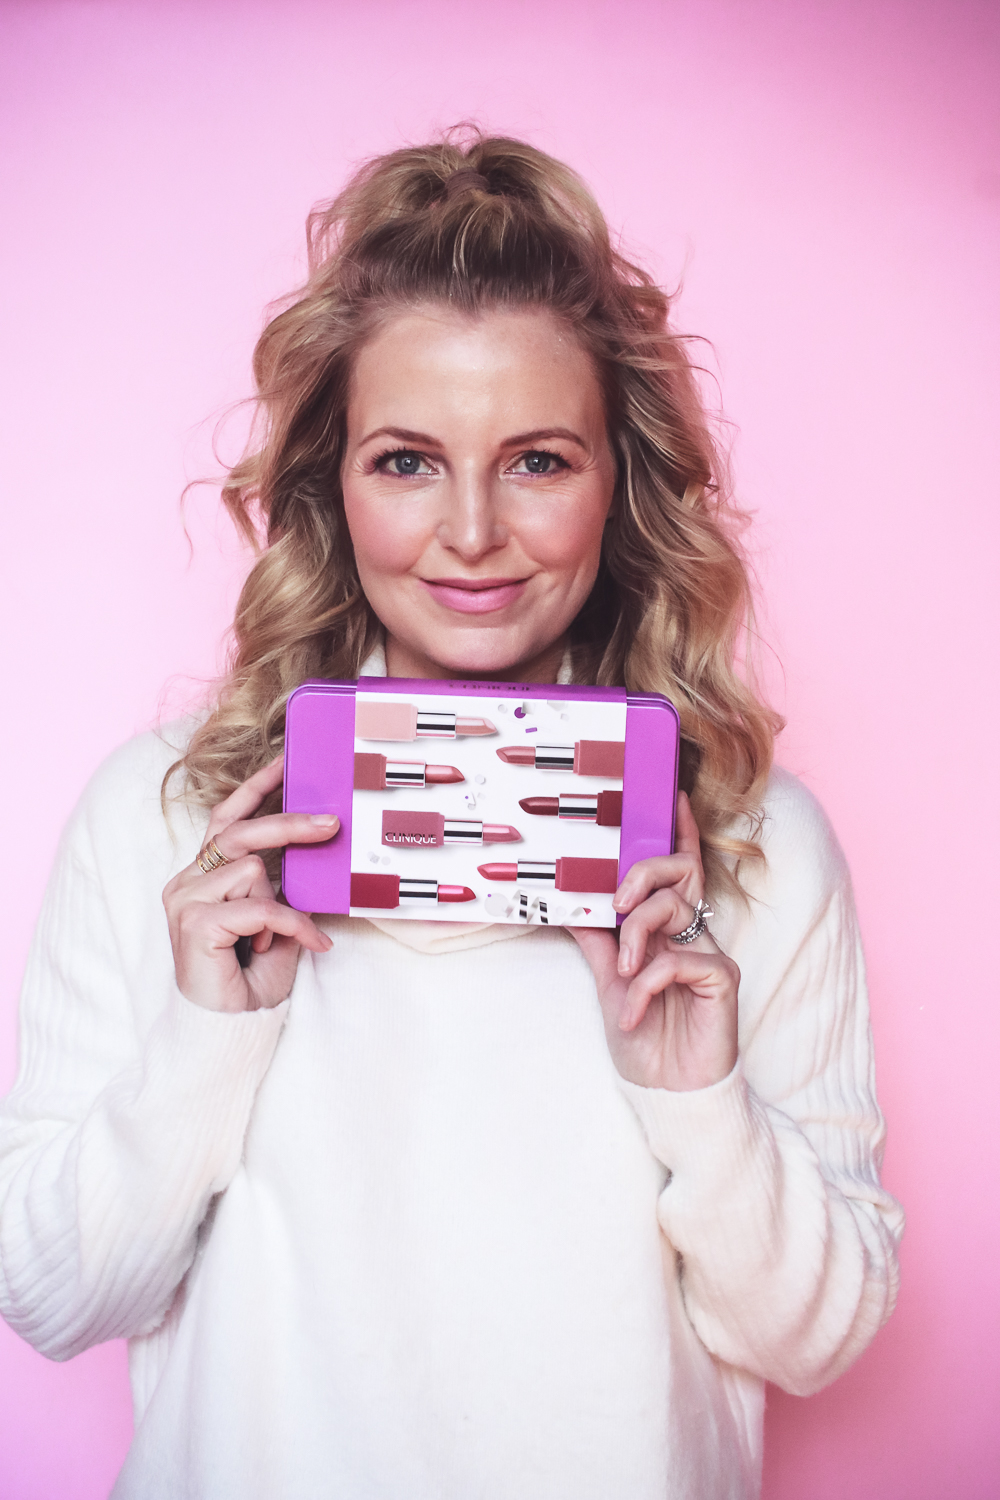 Beauty Gifts Under $50 from Nordstrom | Beauty Blogger, Erin Busbee of Busbee Style, Featuring Clinique Lip Pop gift set